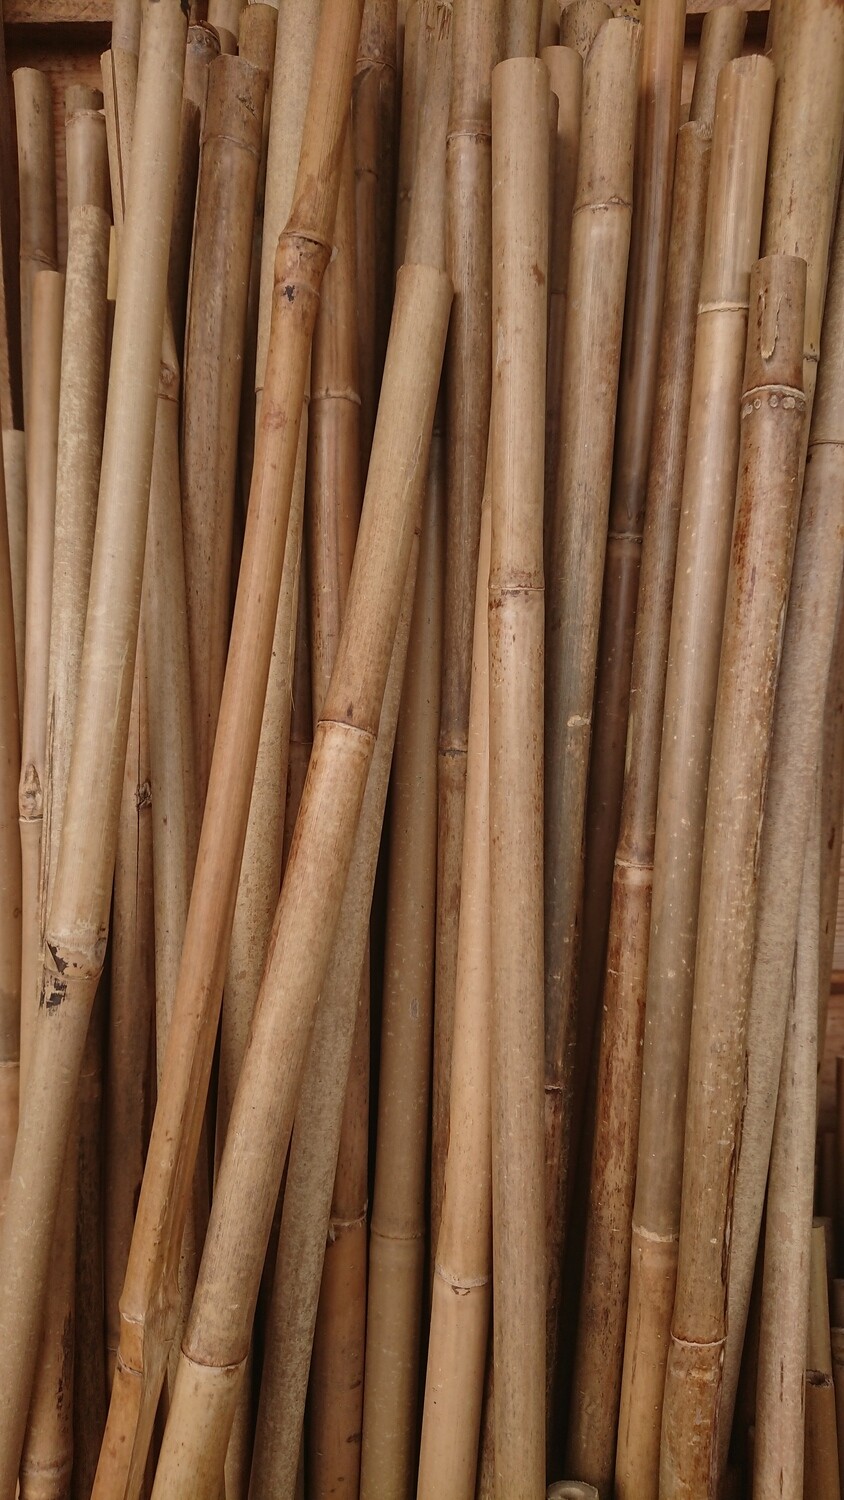 Bamboo canes 6ft